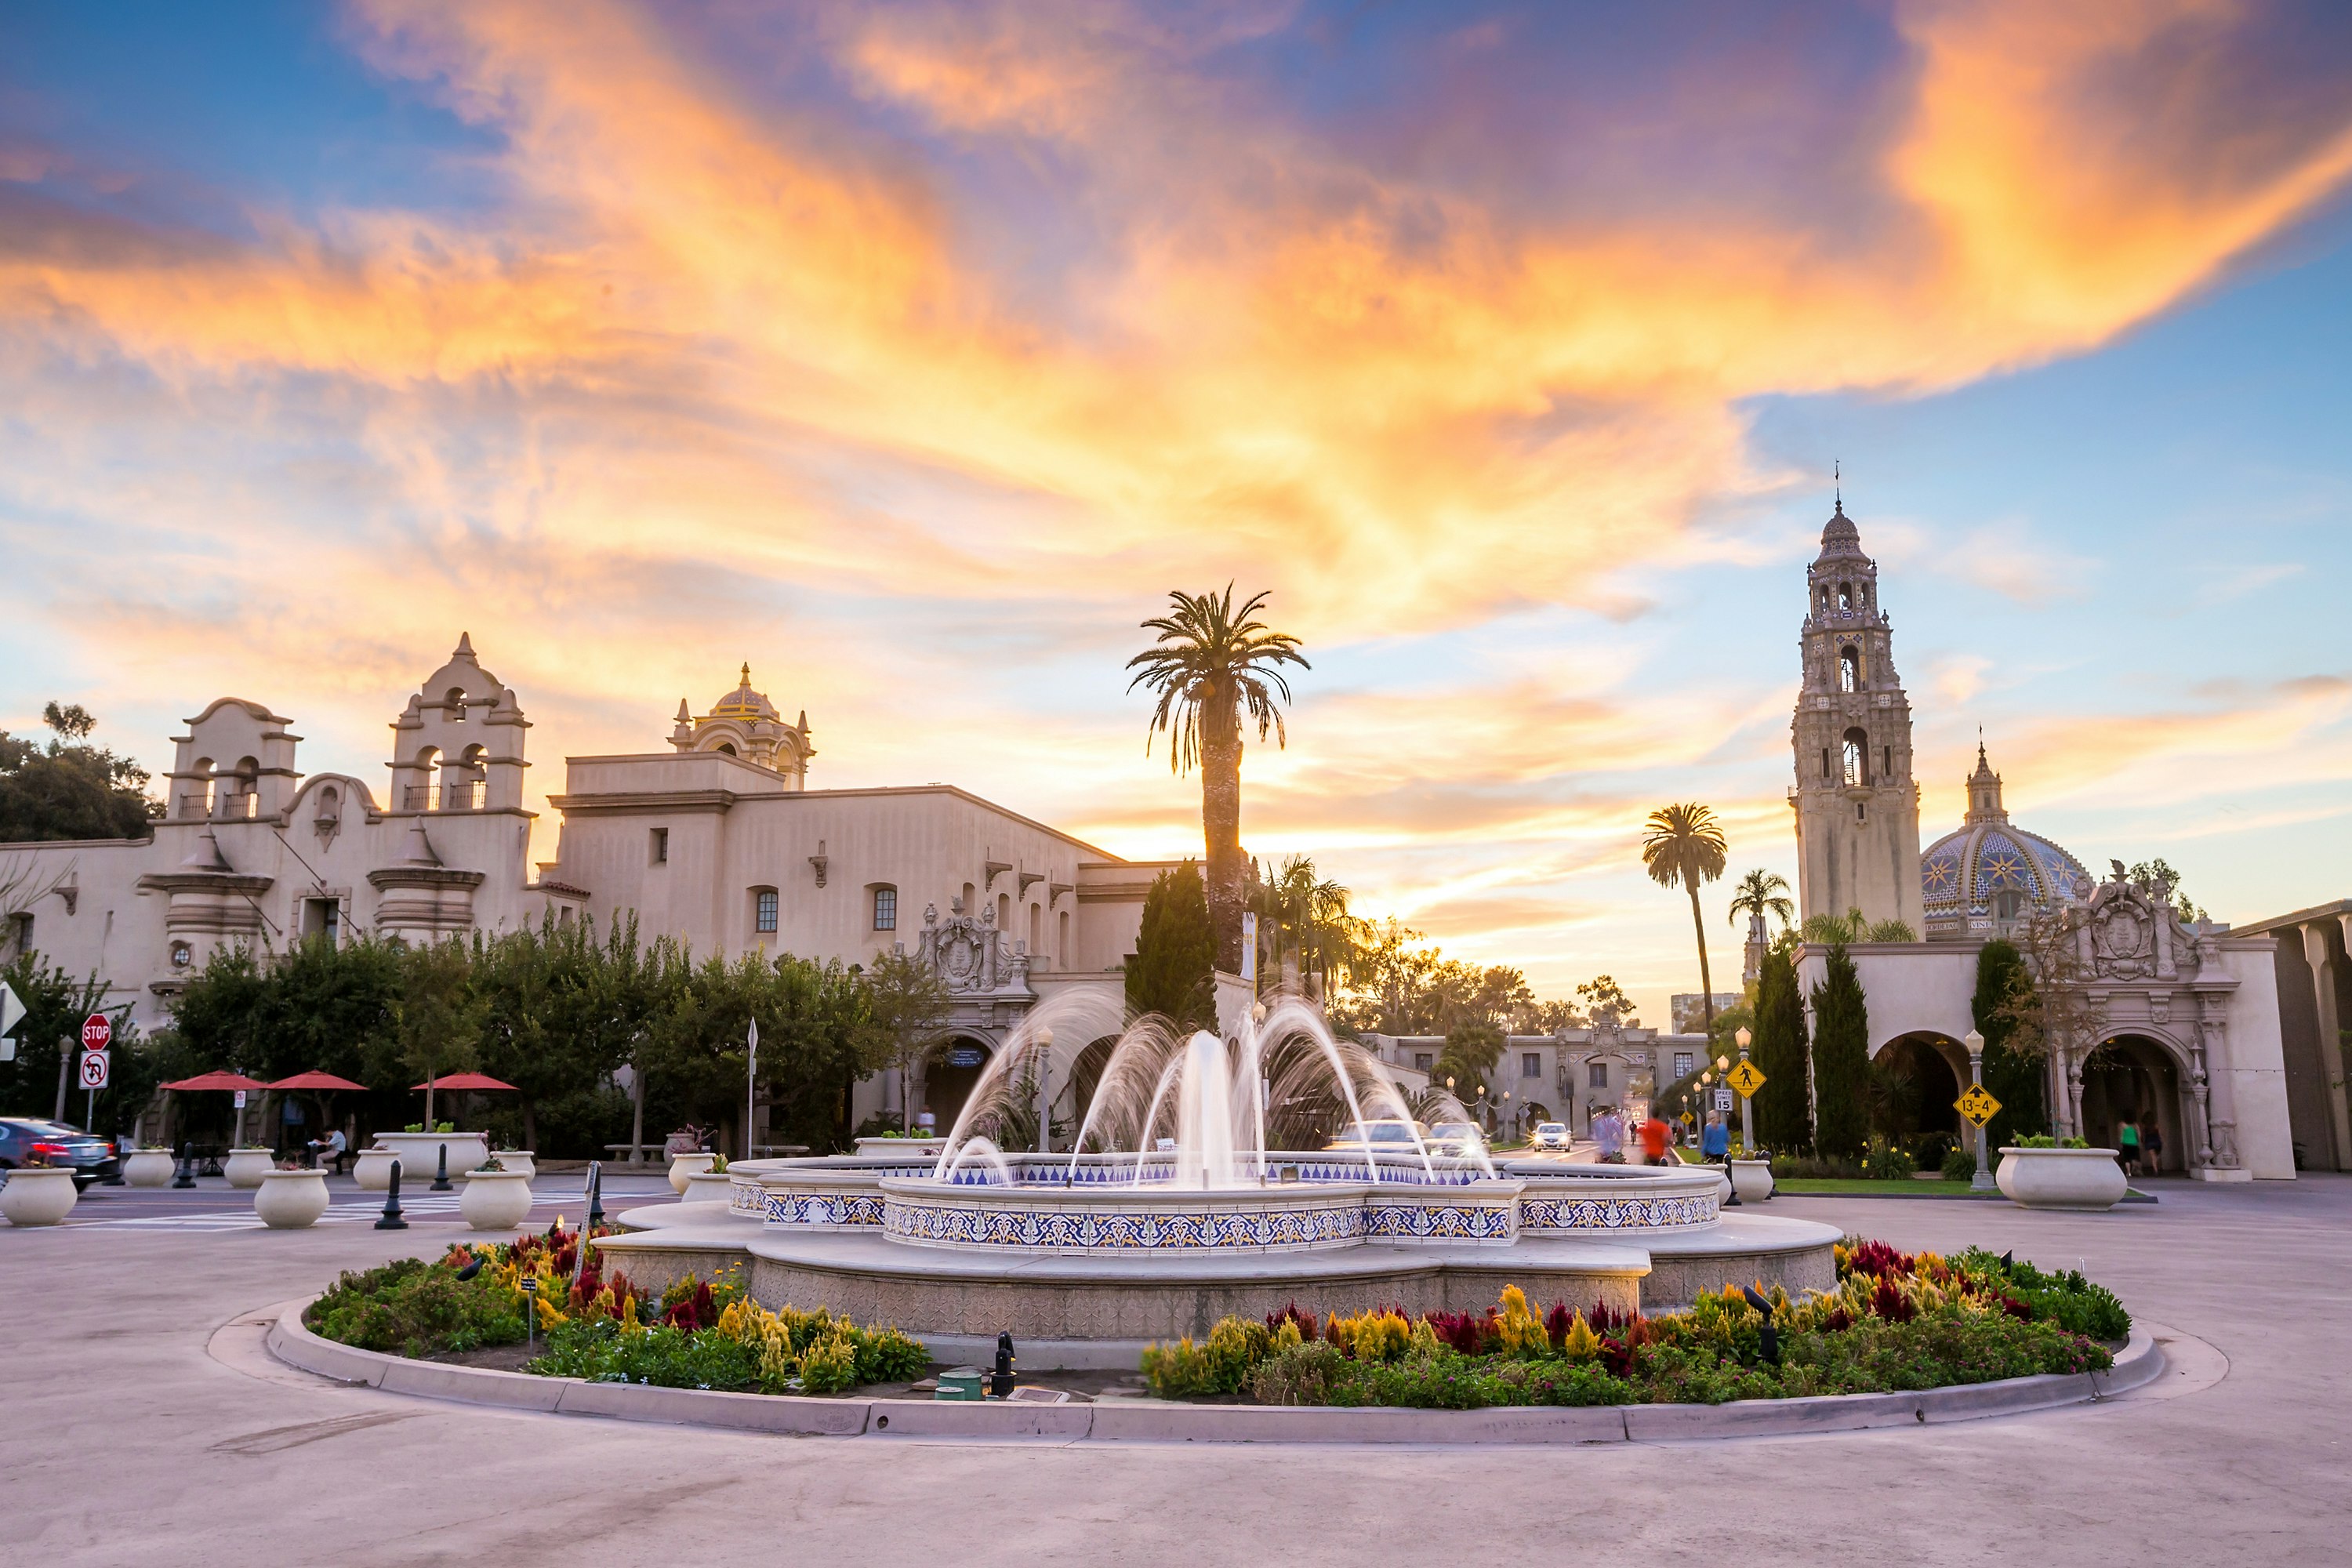 The main square of Balboa park with a fountain adorned in blue and white tile and surrounded by Spanish-style buildings